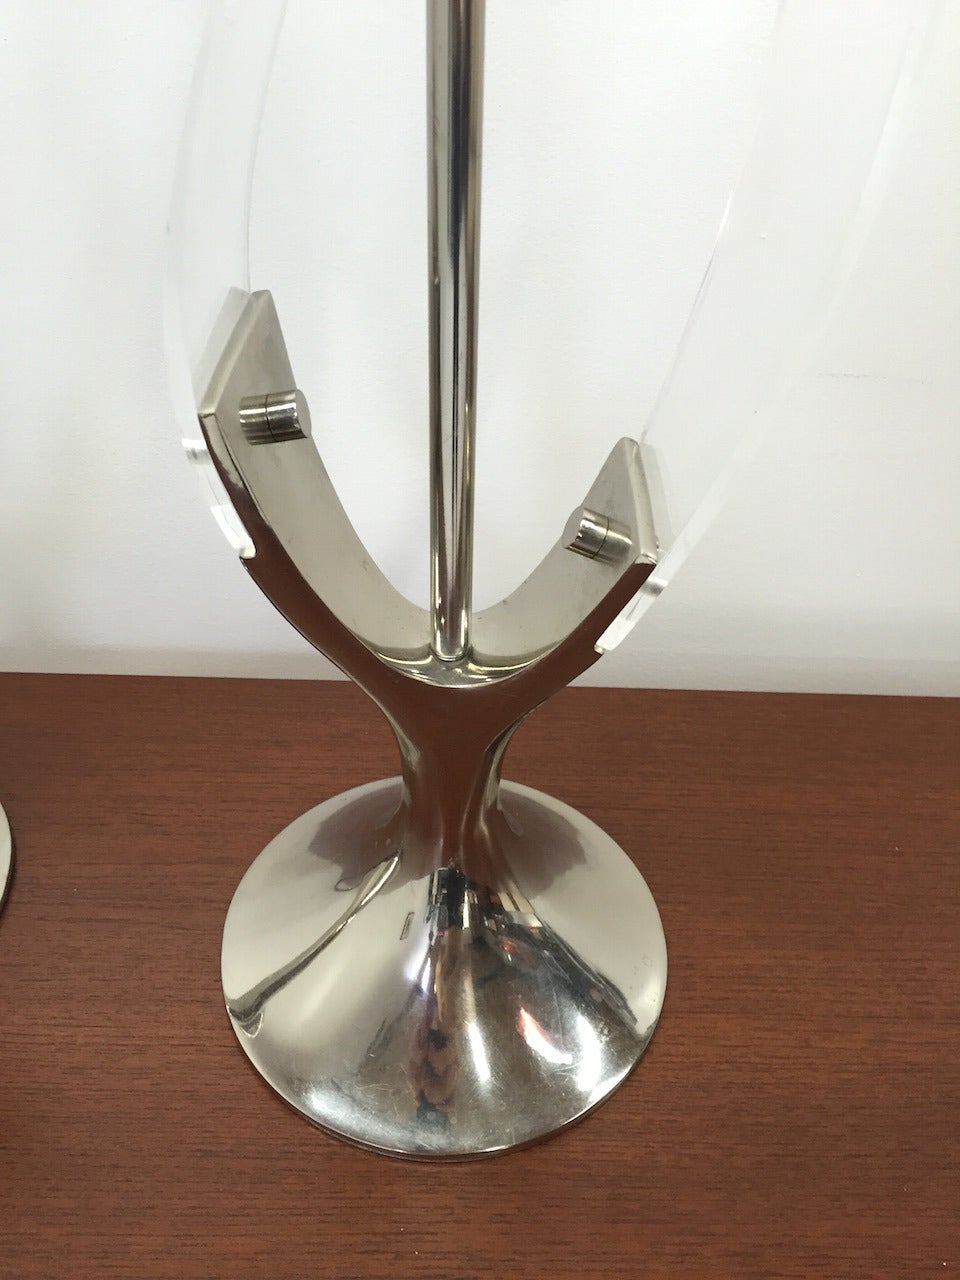 Exceptional Pair of Chrome and Lucite Table Lamps by Laurel Lamp Co. For Sale 3